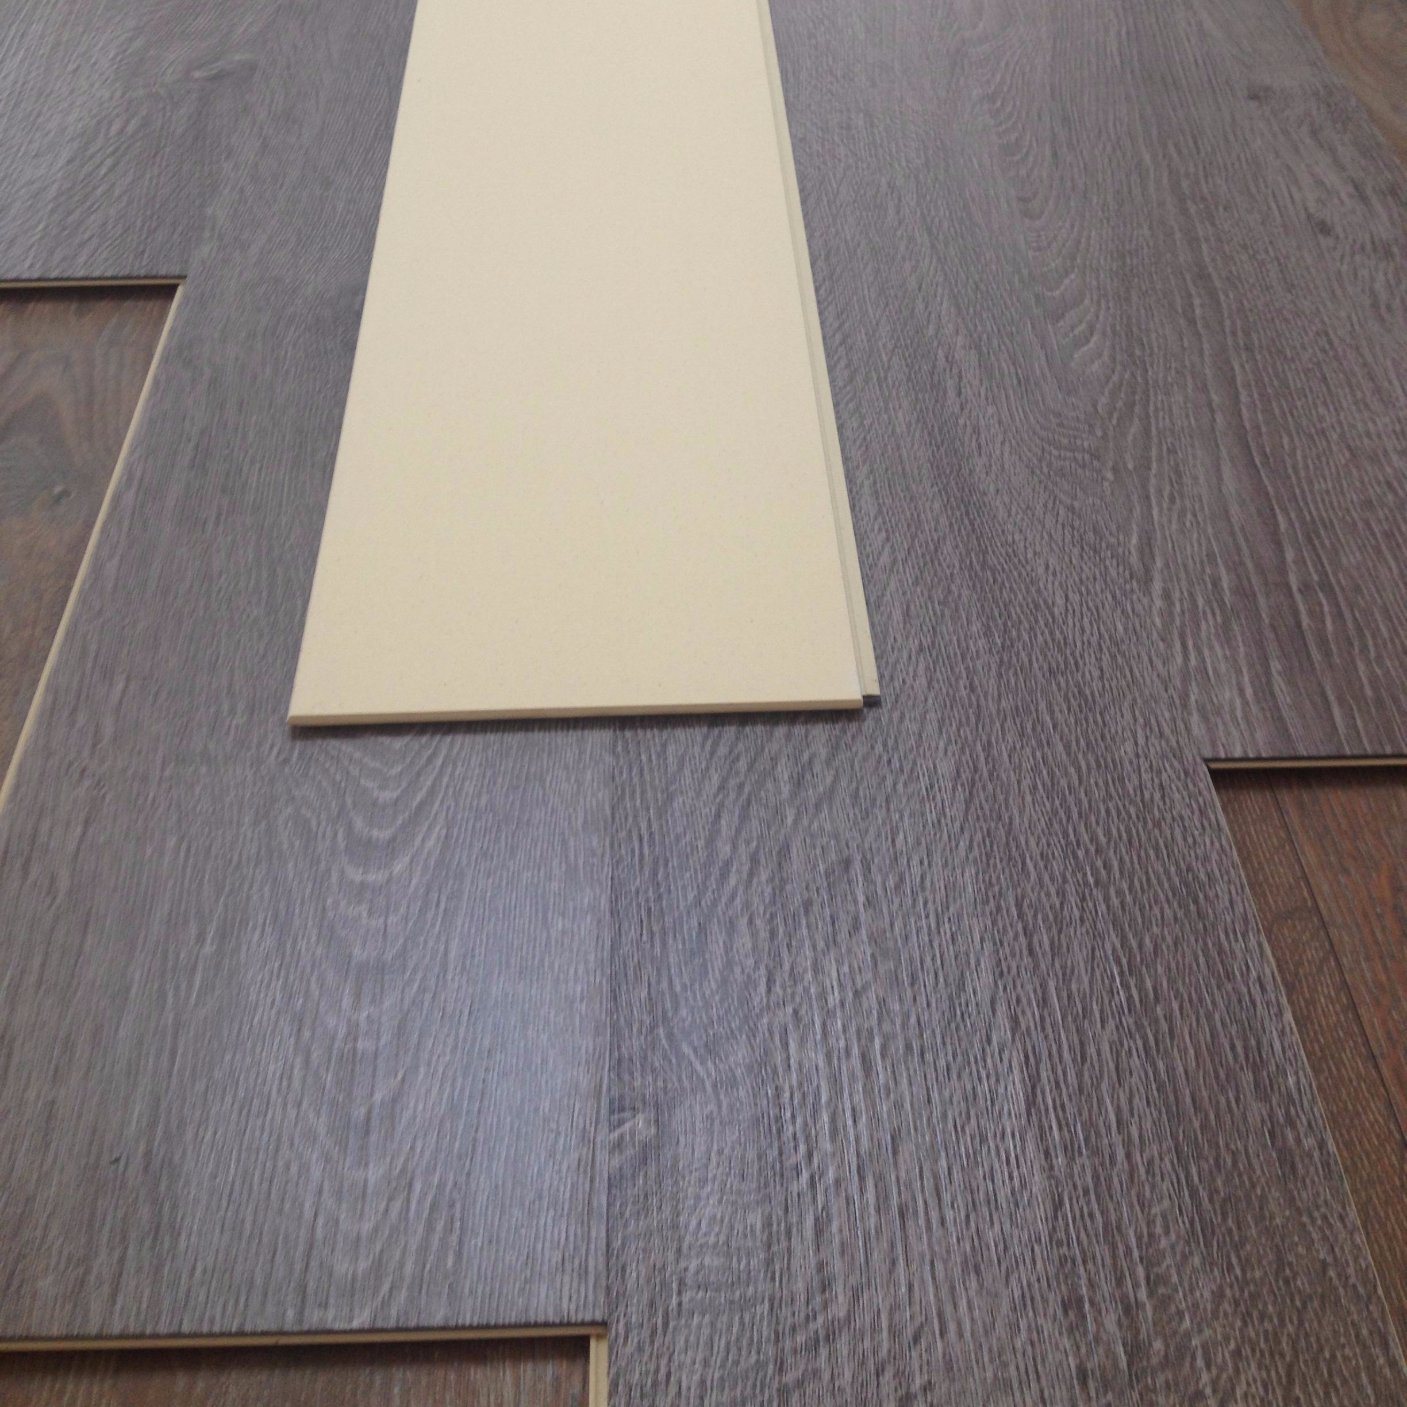 High Quality Durable Soundproof WPC Vinyl Click Flooring